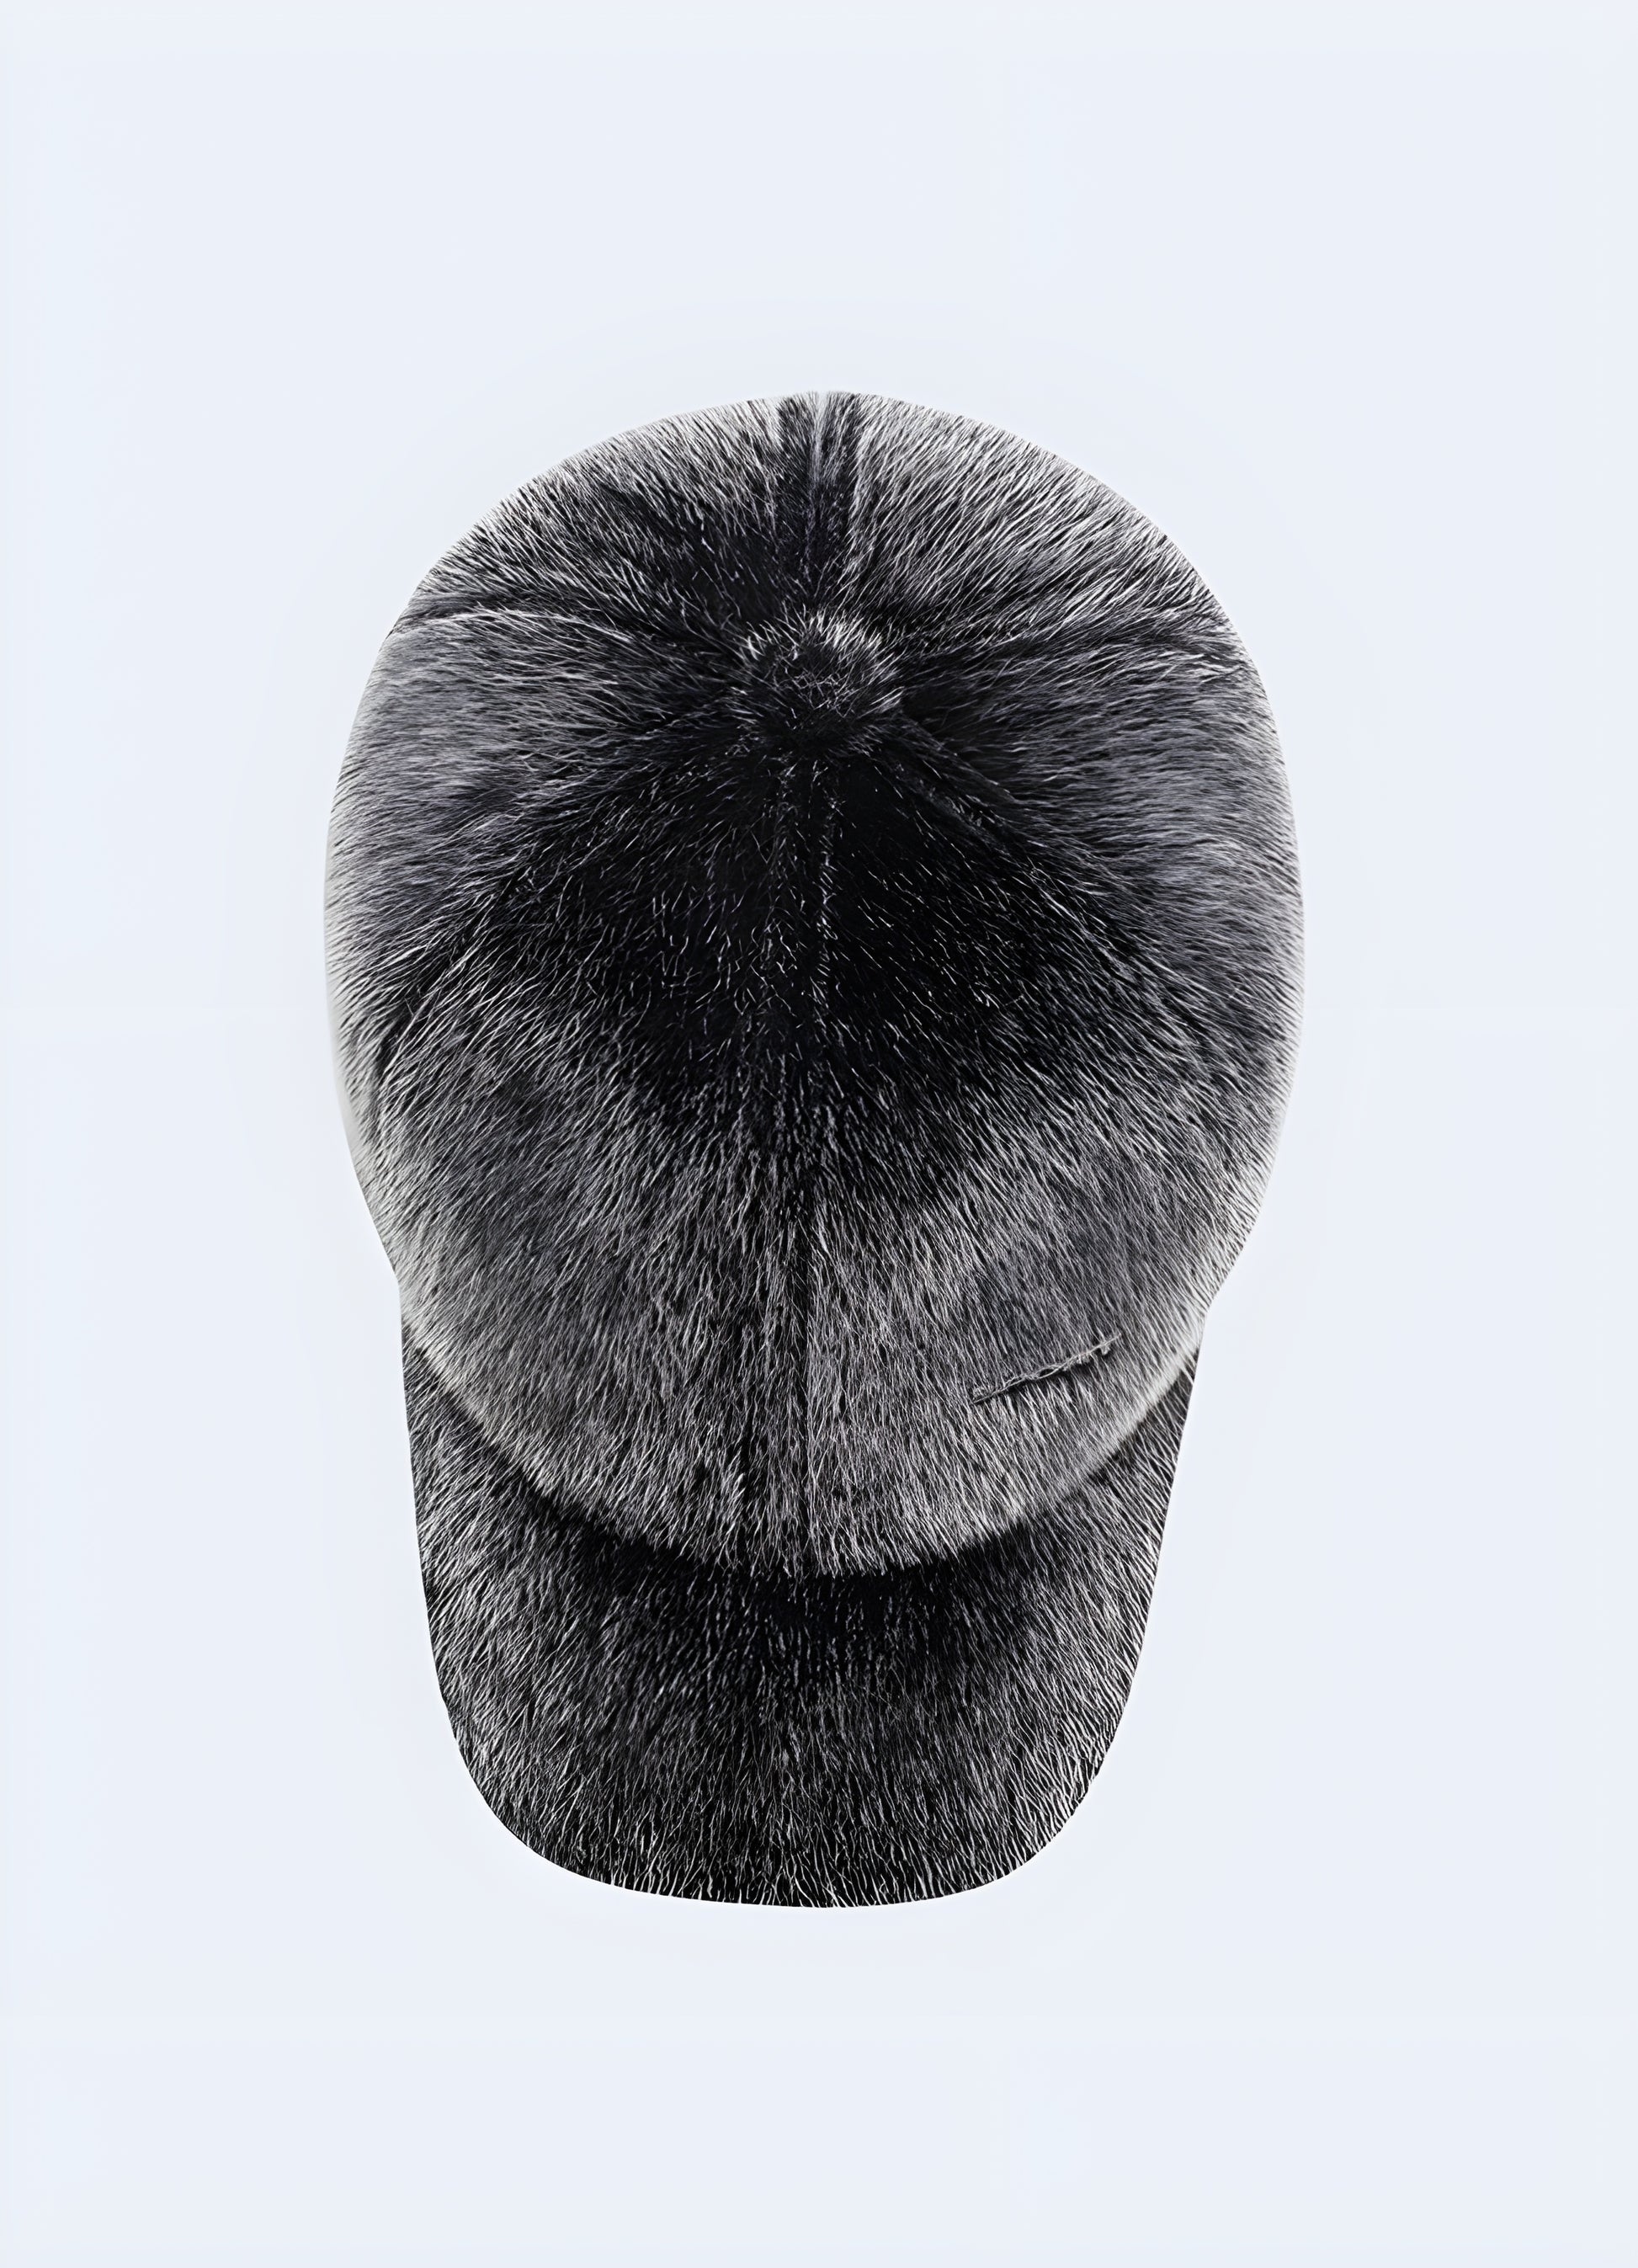 Its 100% faux fur evokes an air of distinction and offers a thick, warm, and resistant companion for everyday wear.